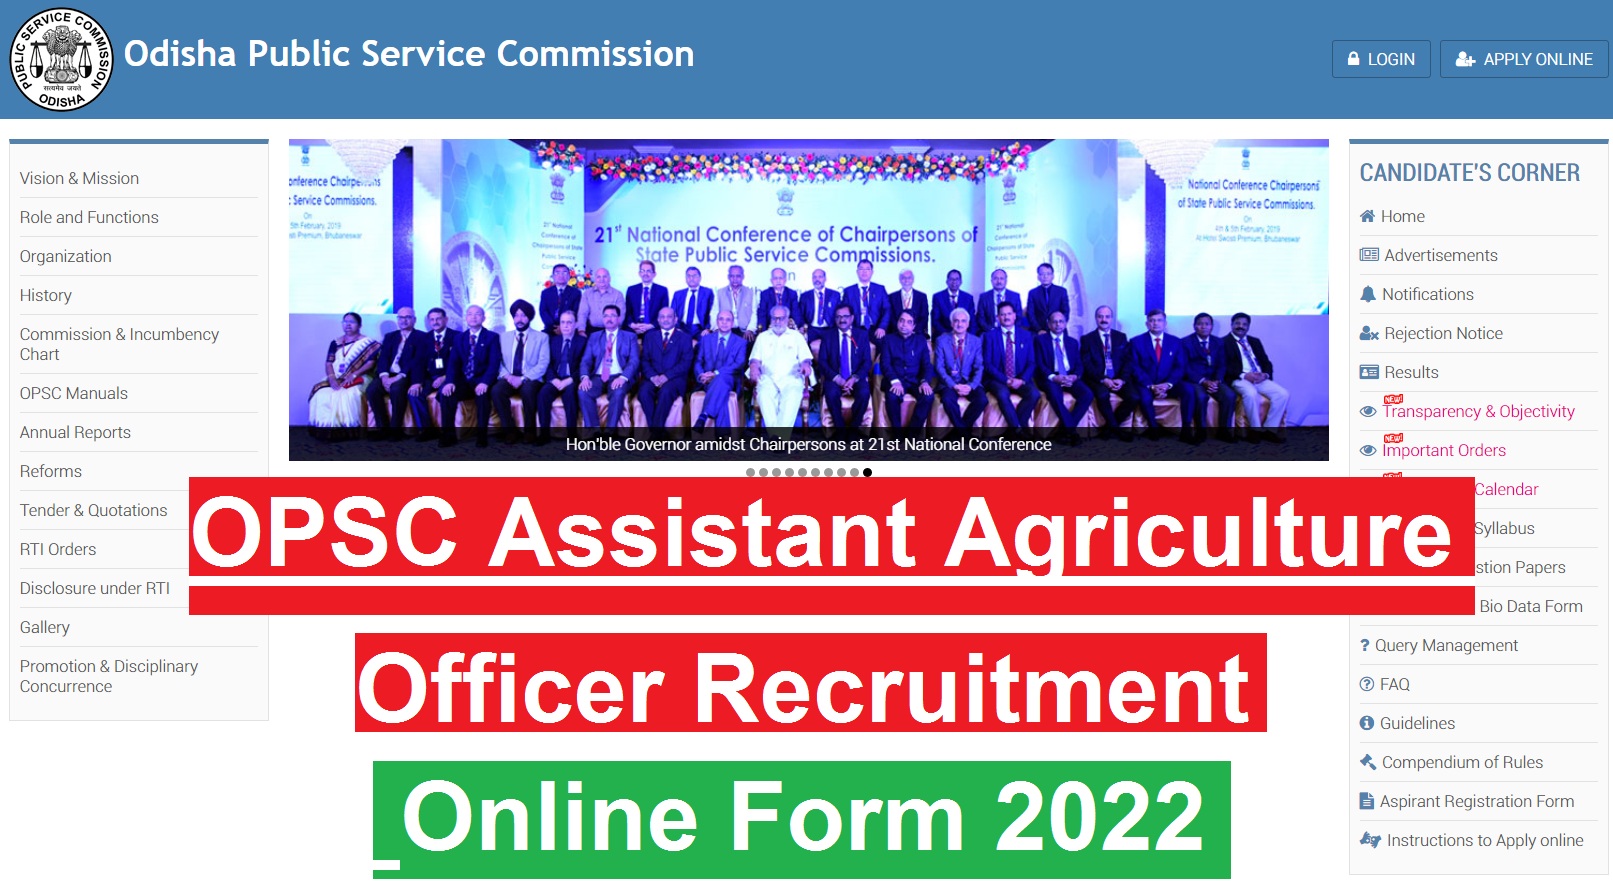 OPSC Assistant Agriculture Officer Recruitment Online Form 2022